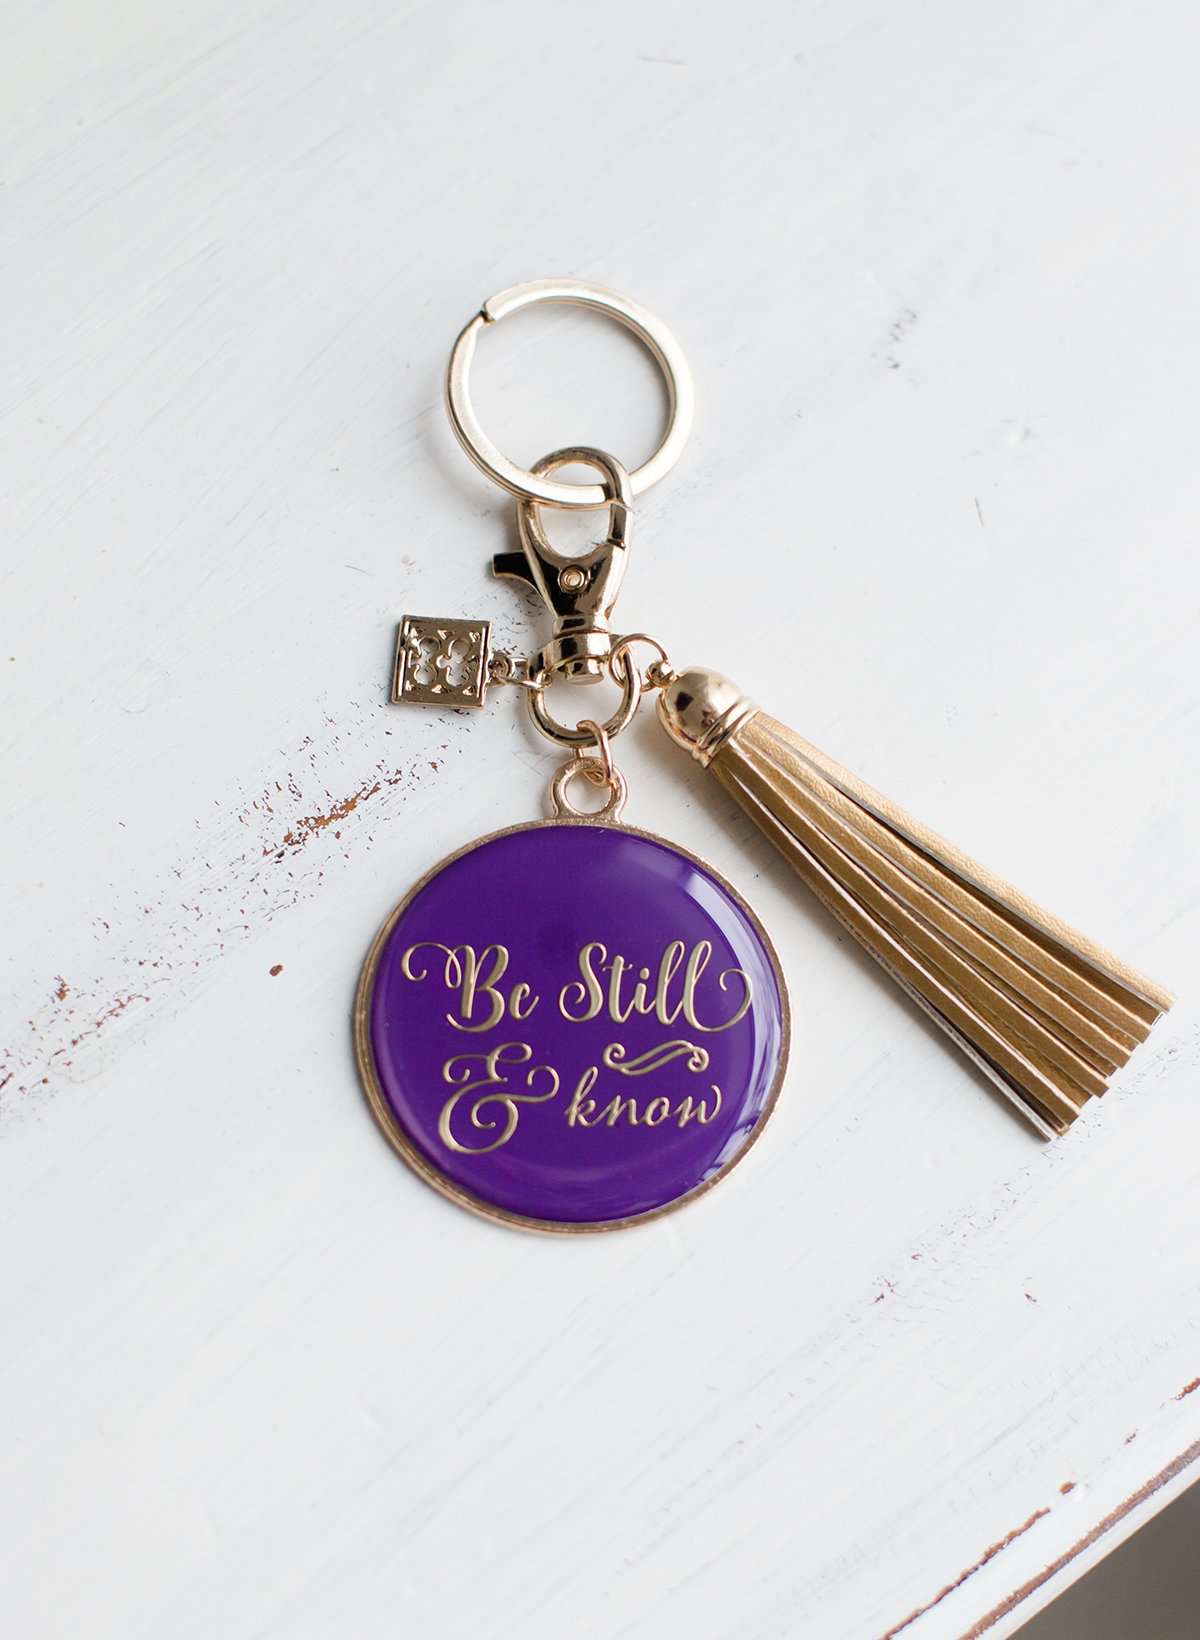 Be still and know purple keychain with gold tassel.